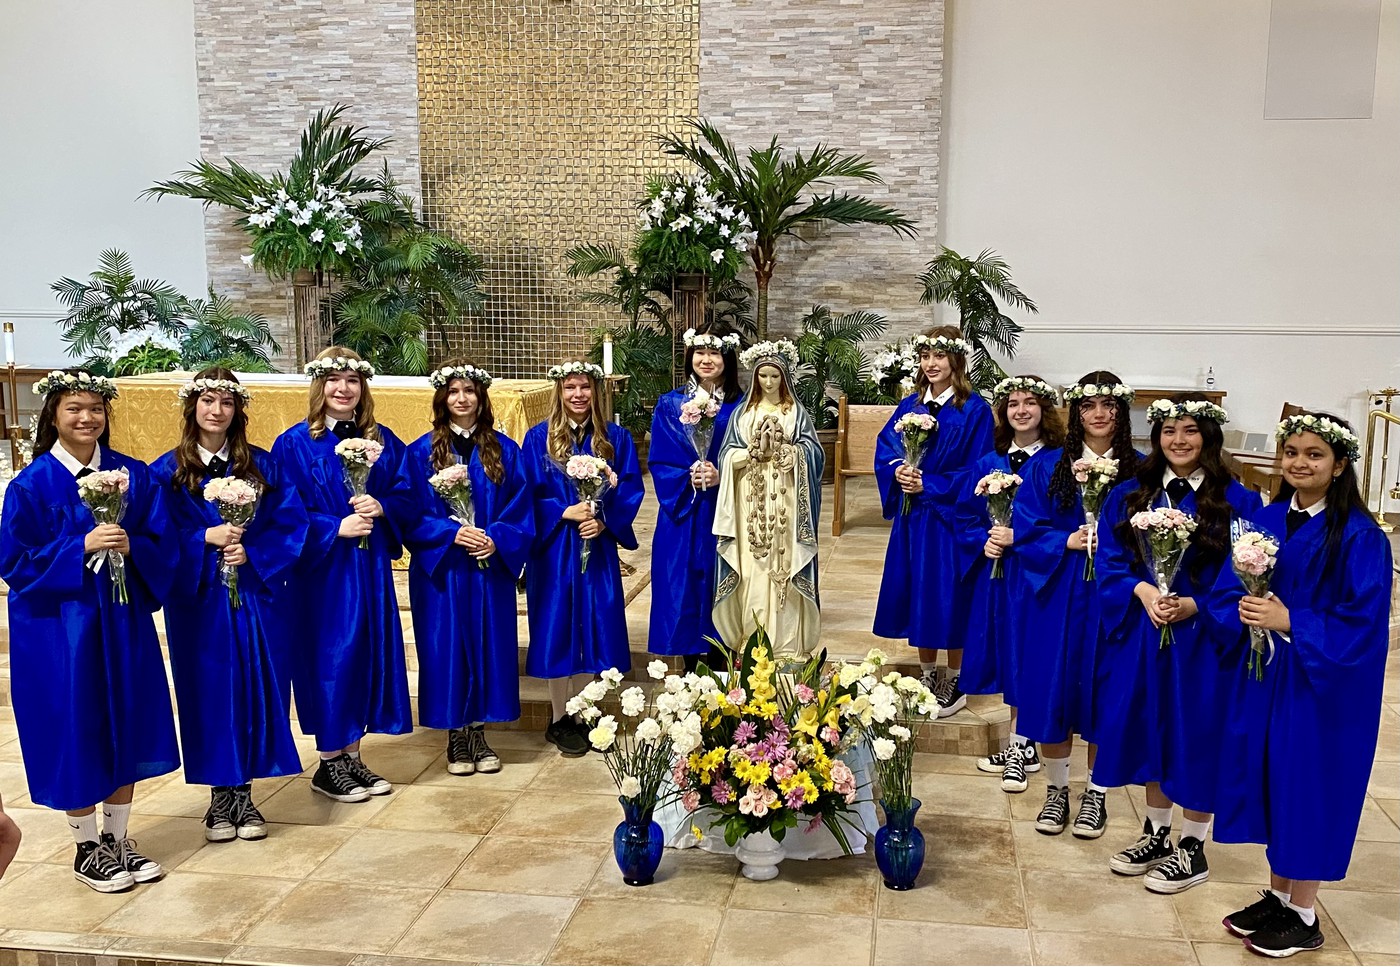 Eighth Graders Experience Cherished Traditions at St. Viator Parish